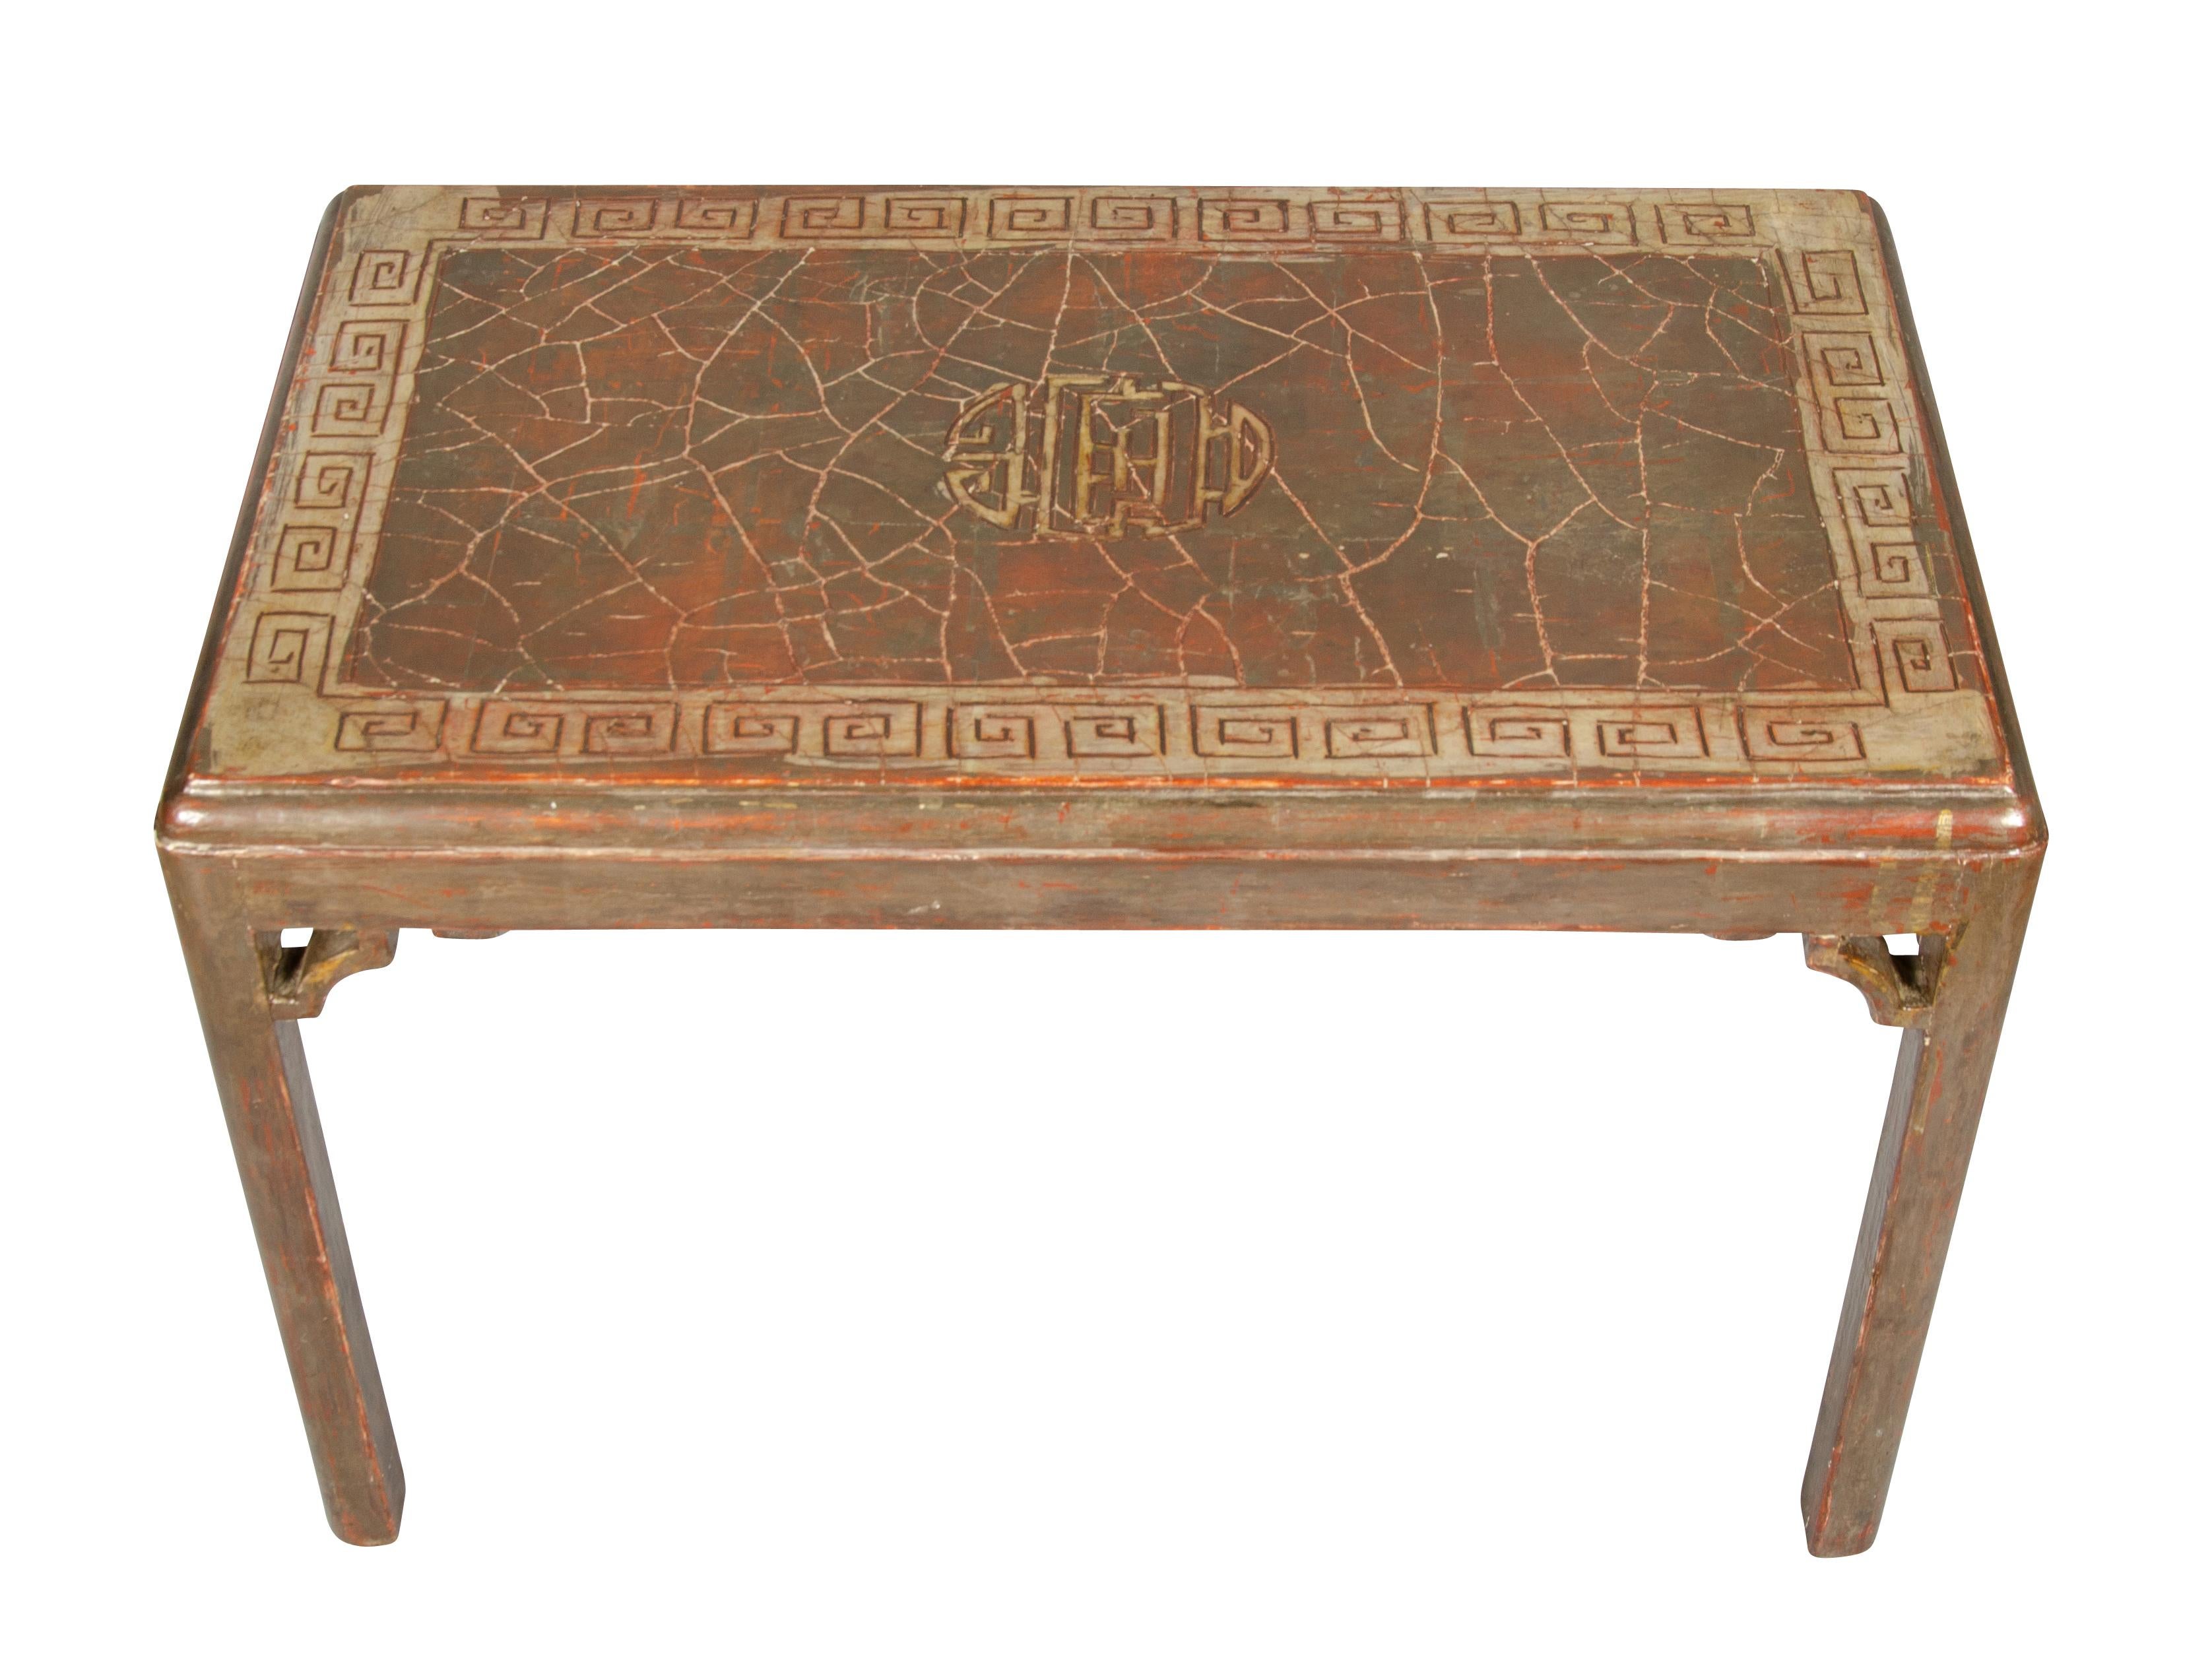 Rectangular top with Asian inspired decoration, raised on square section legs with spandrels.